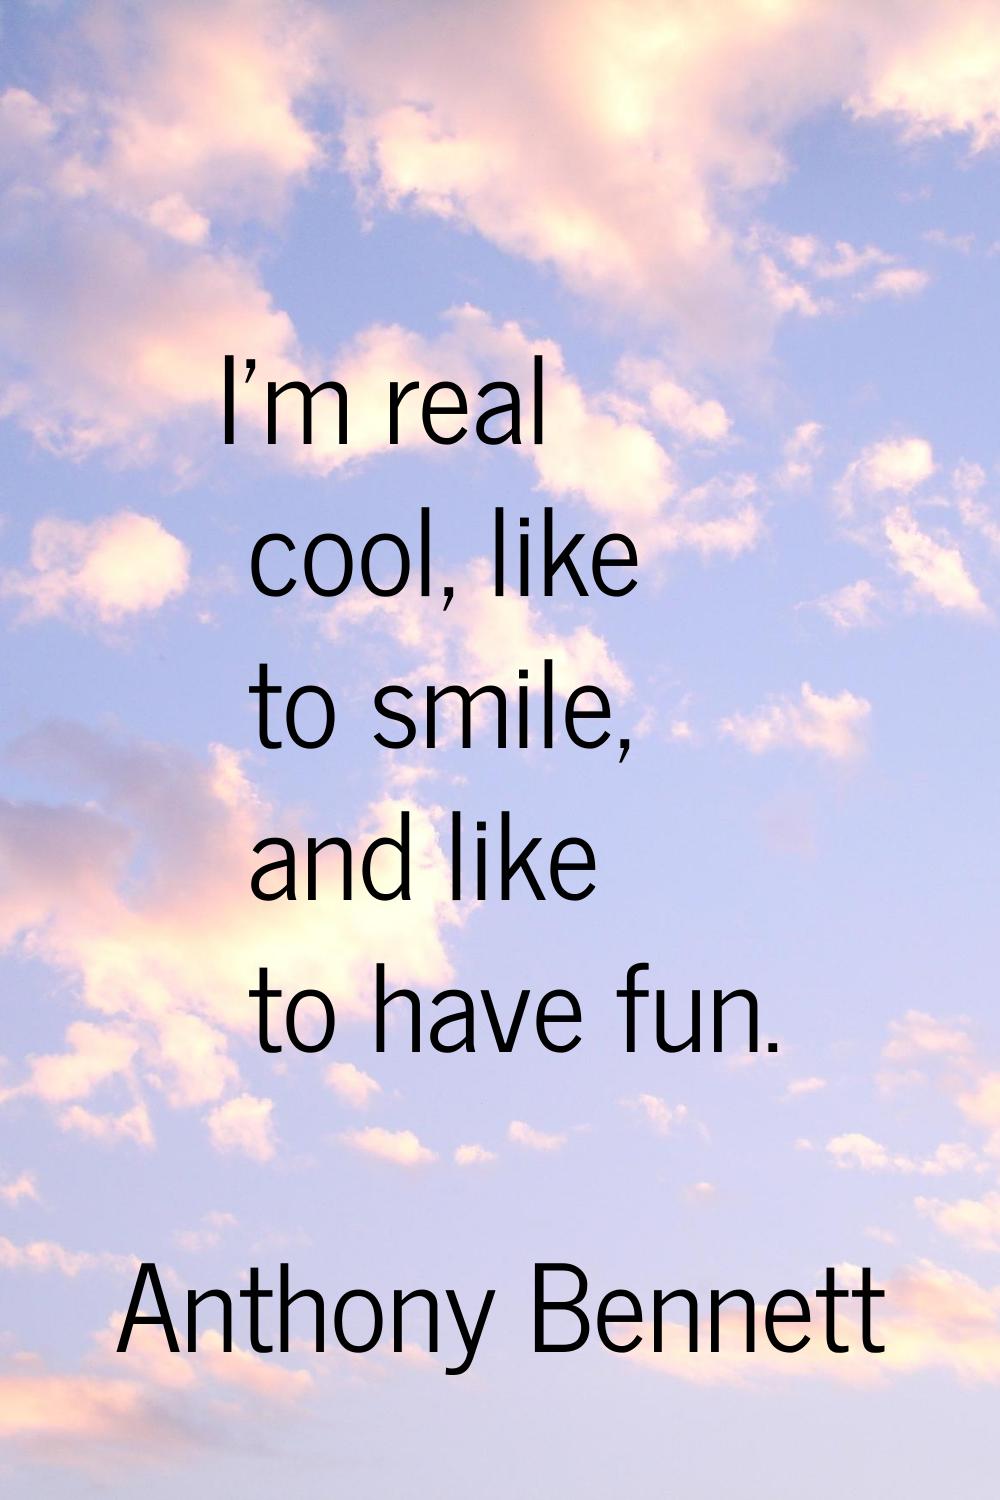 I'm real cool, like to smile, and like to have fun.